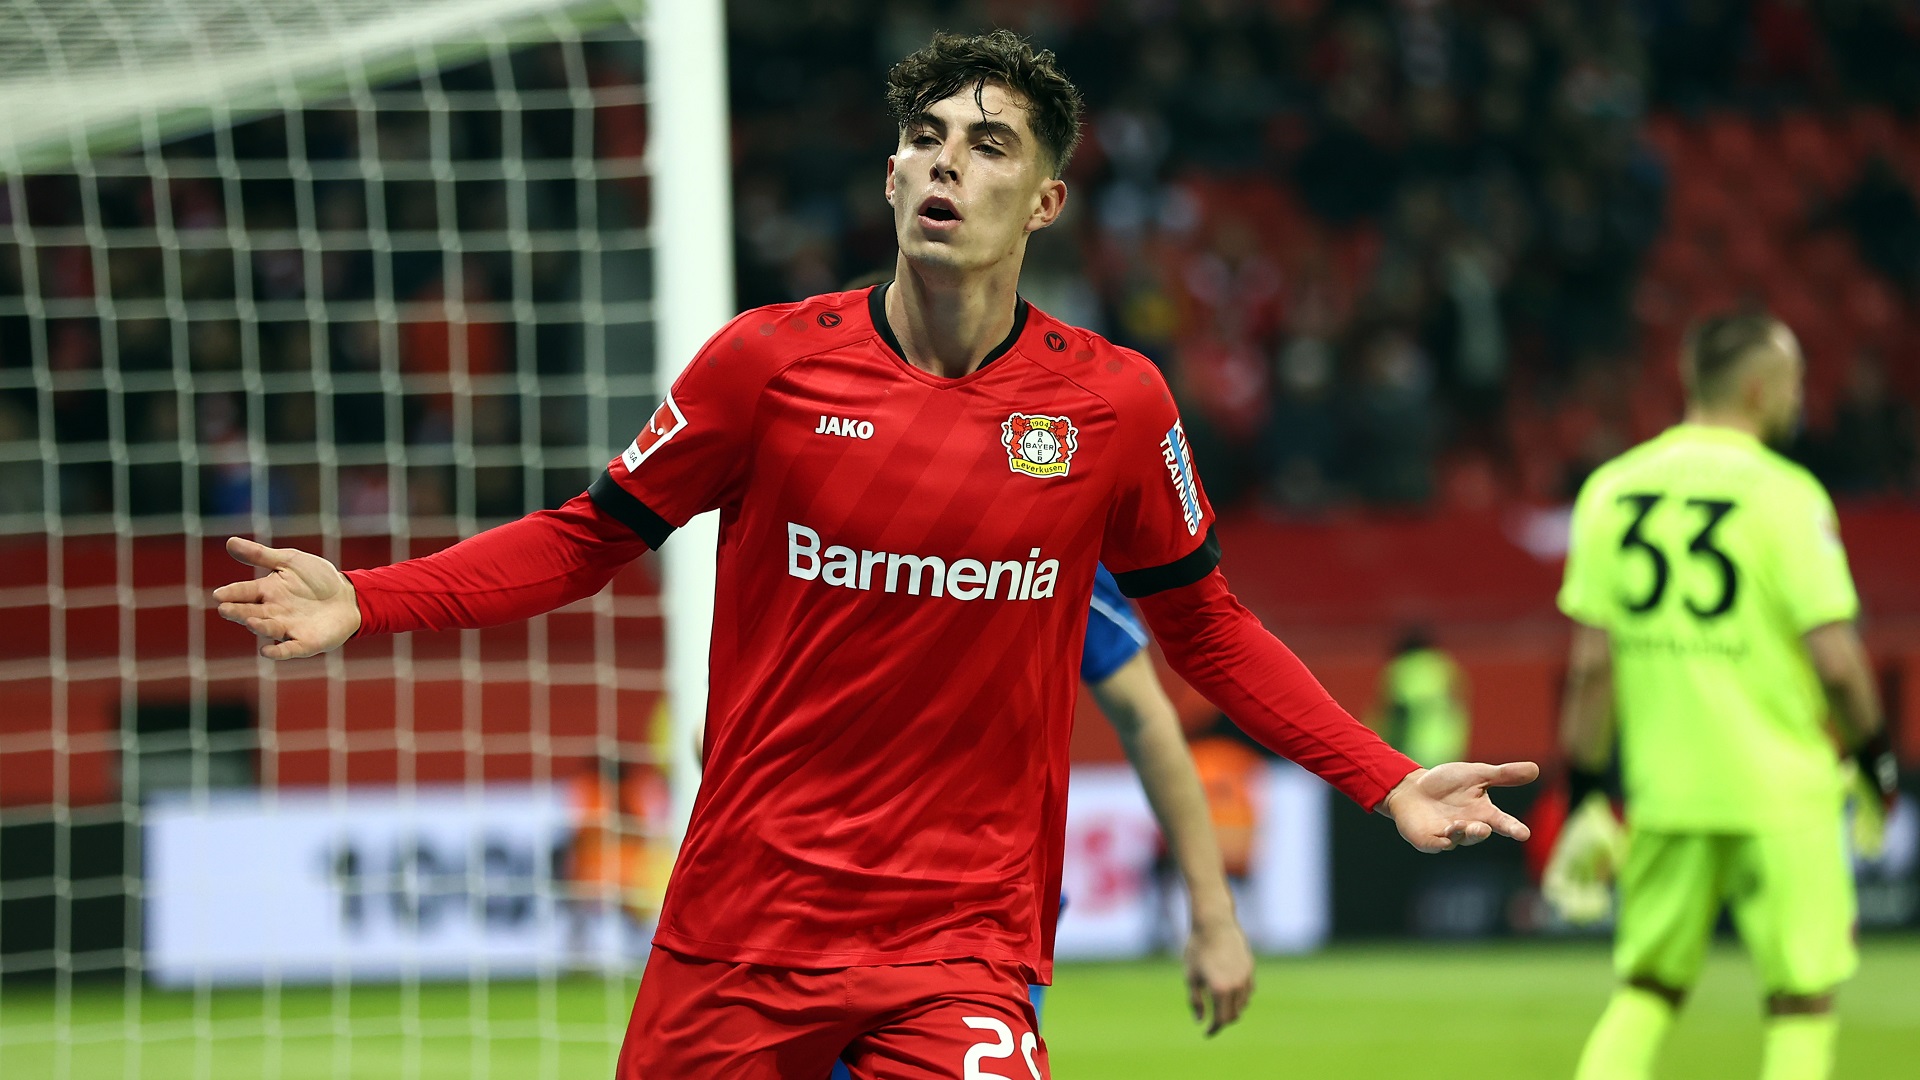 'So far we have no offer' - No bids for Chelsea-linked Havertz, claims Leverkusen director